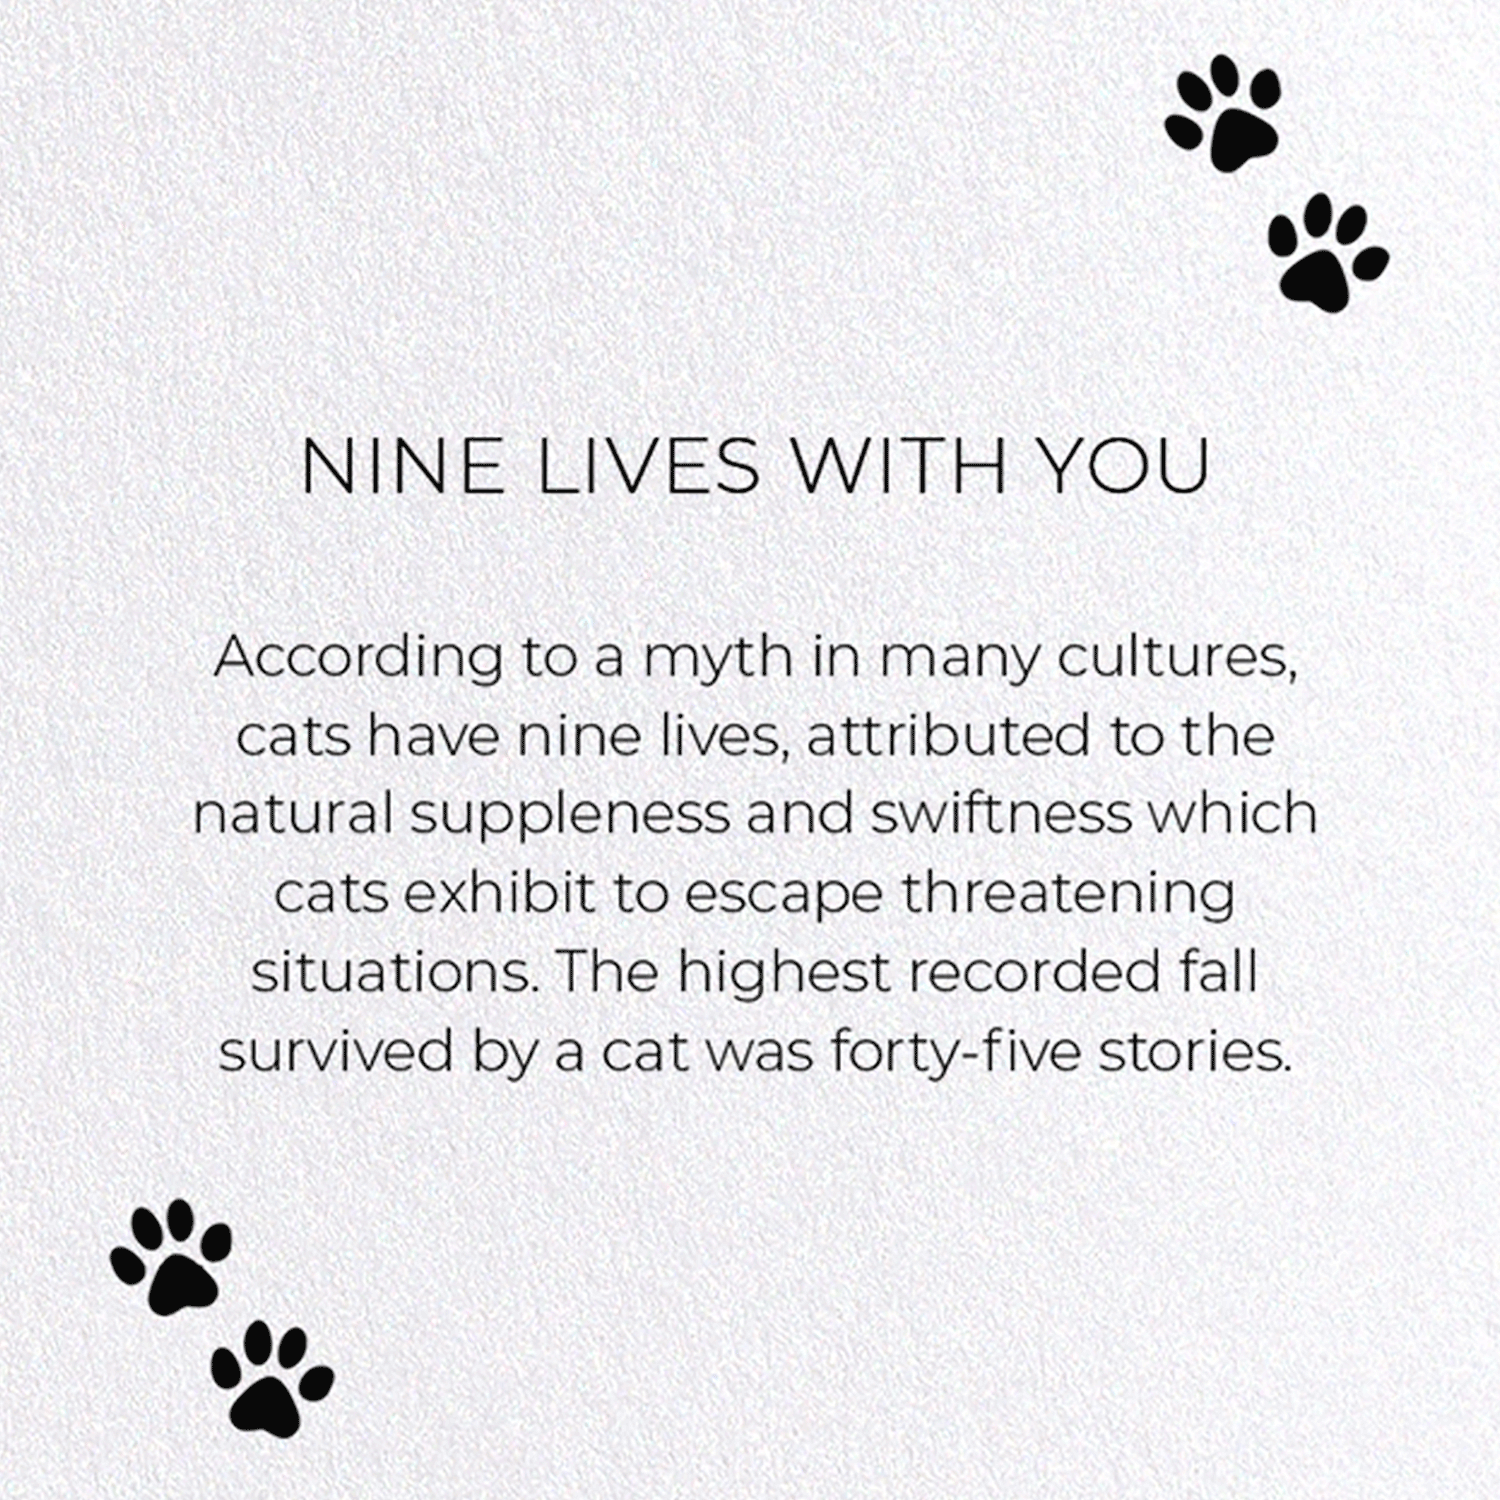 NINE LIVES WITH YOU